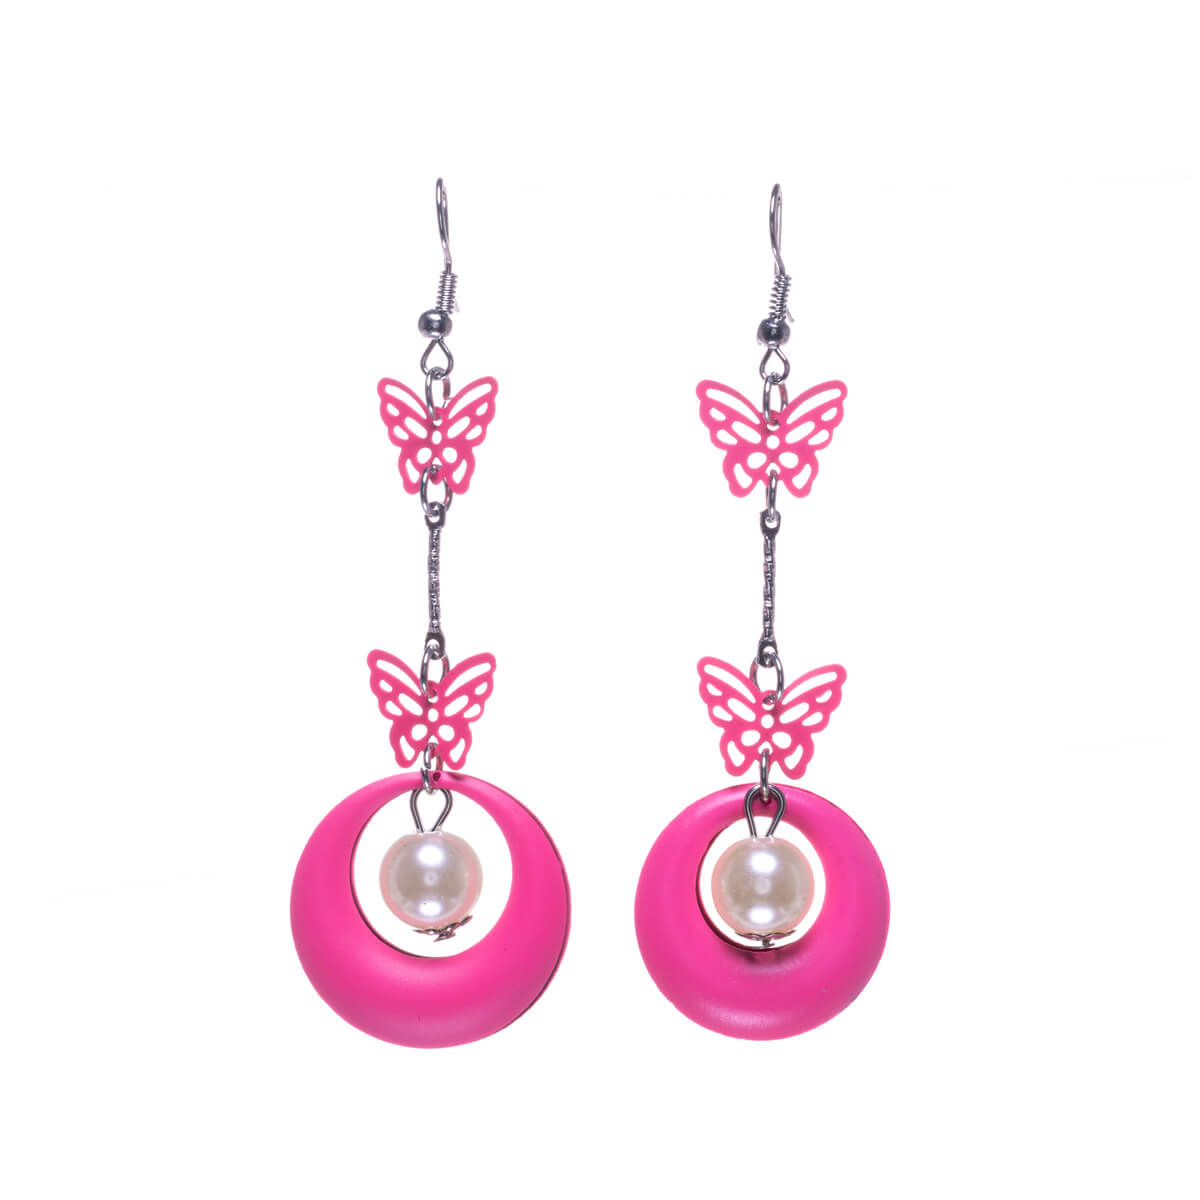 Hanging butterfly earrings with bead